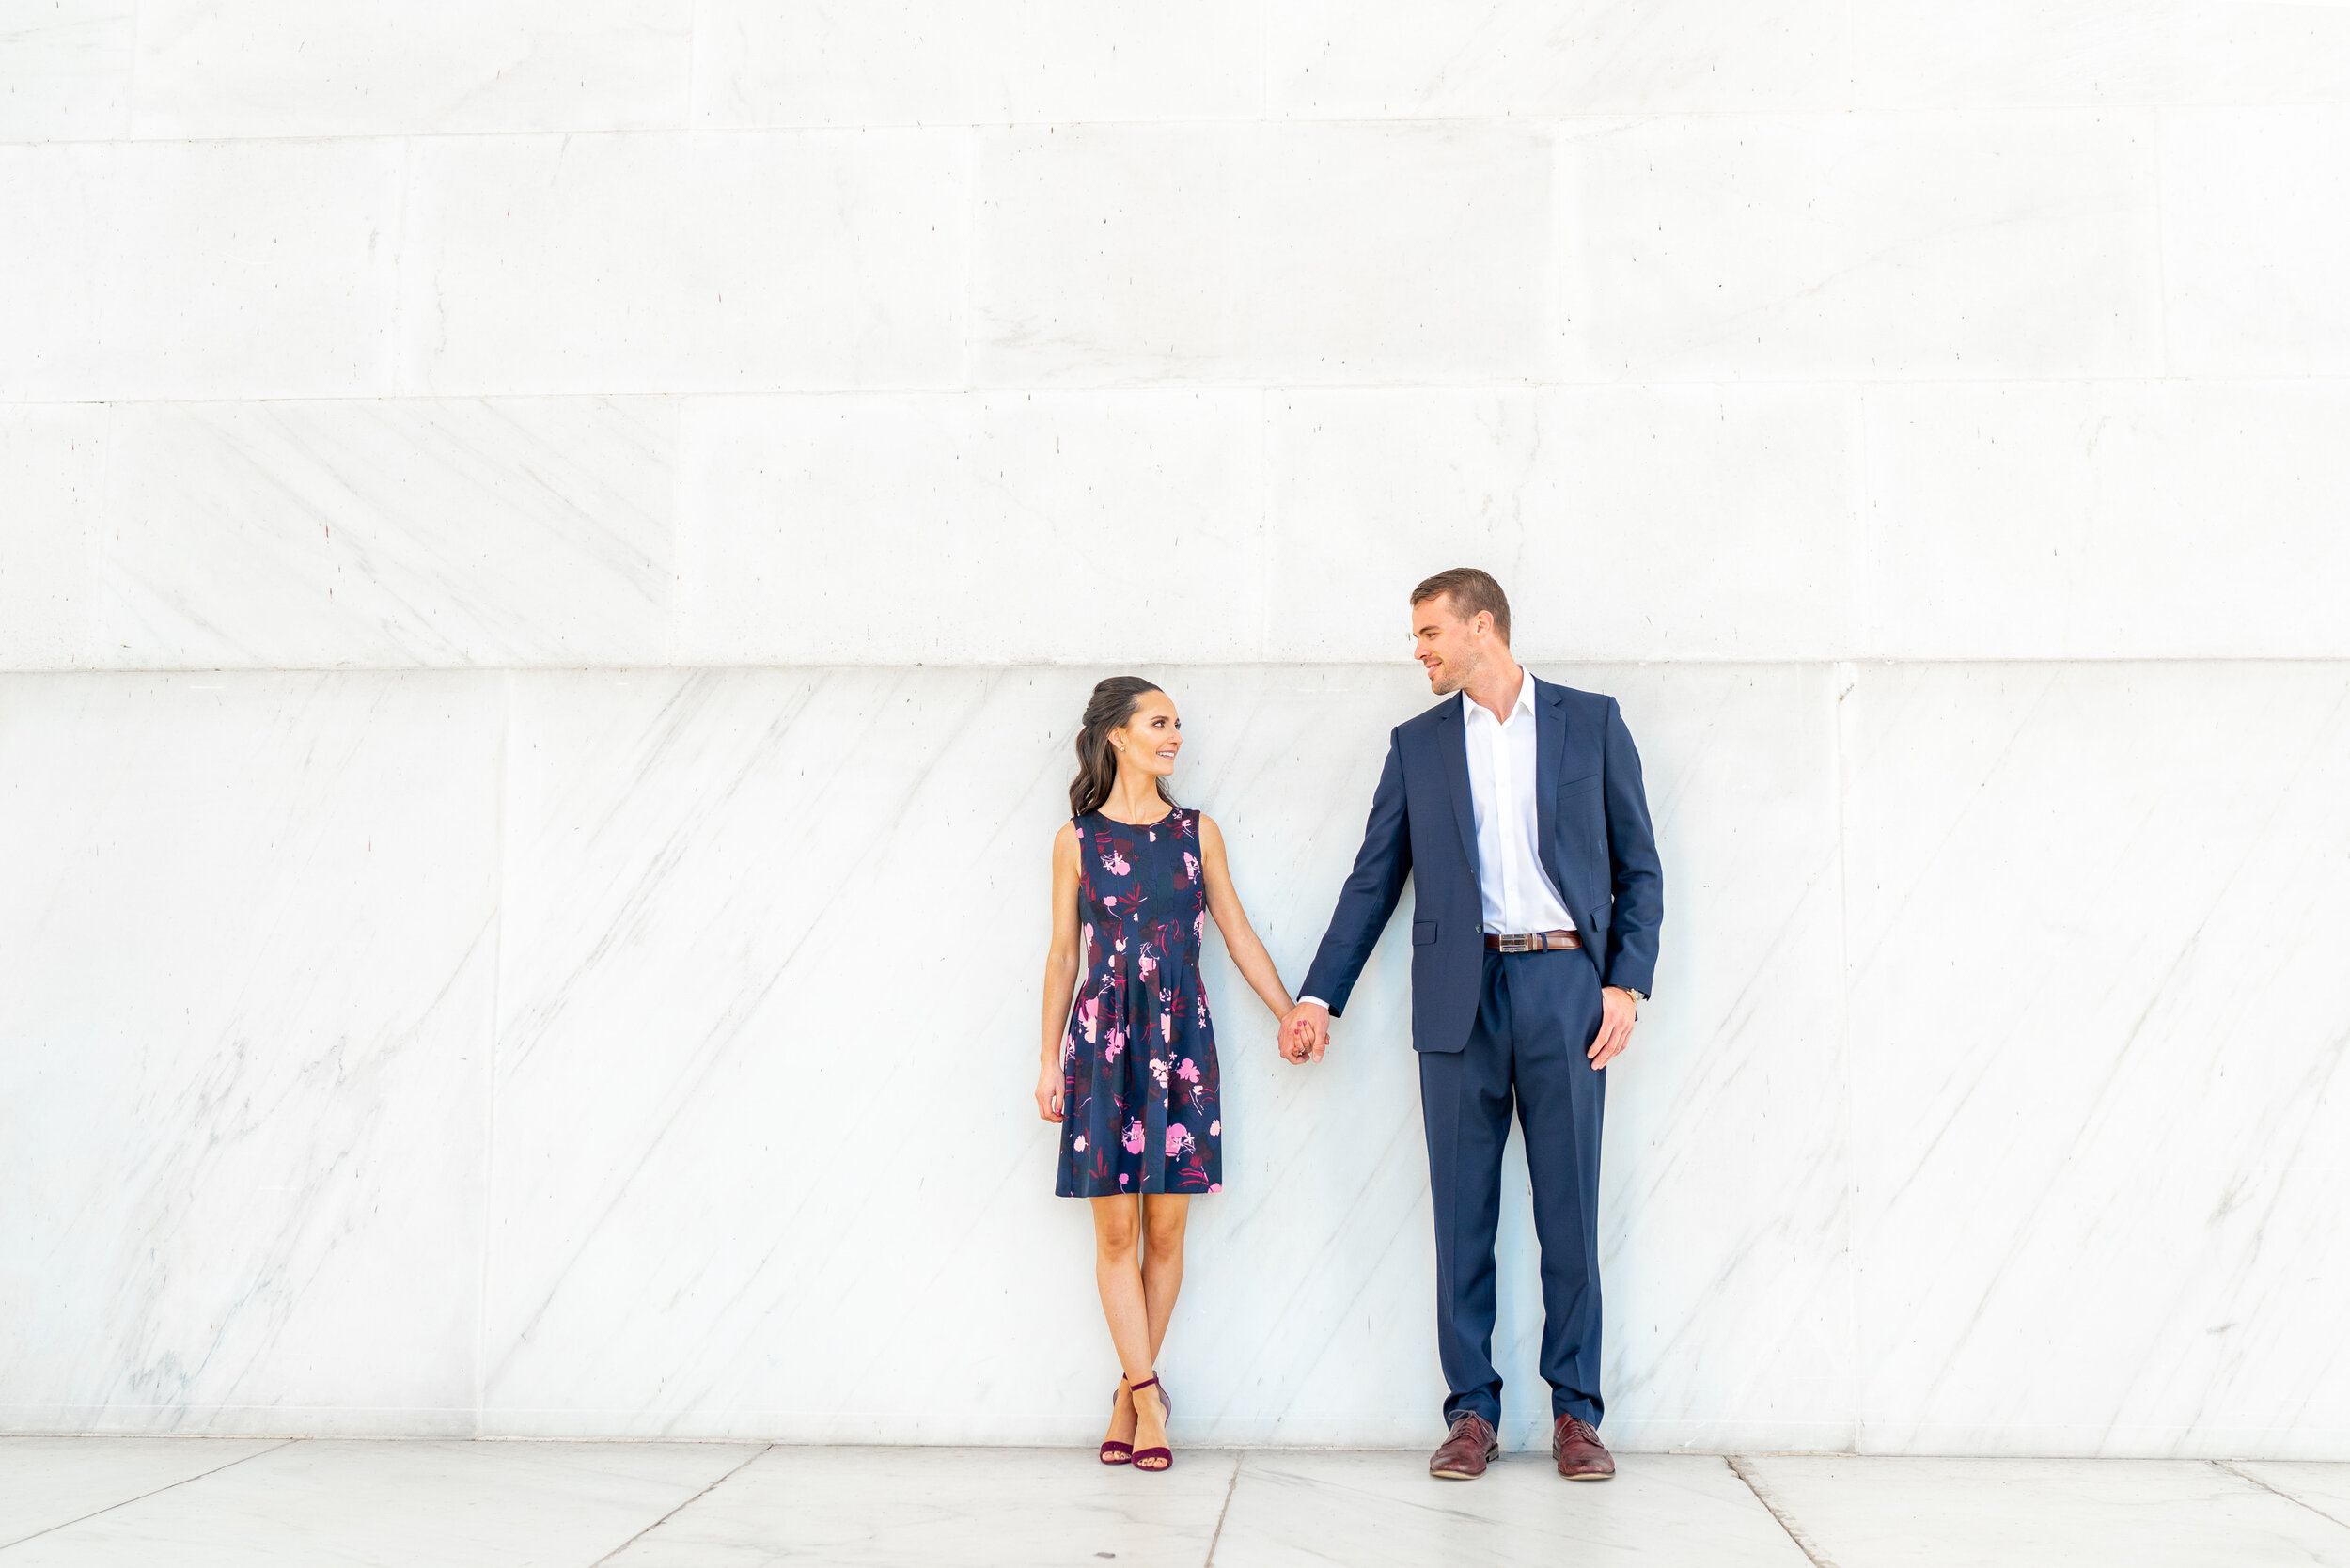 Engagement photos at the lincoln memorial couple leaning against wall